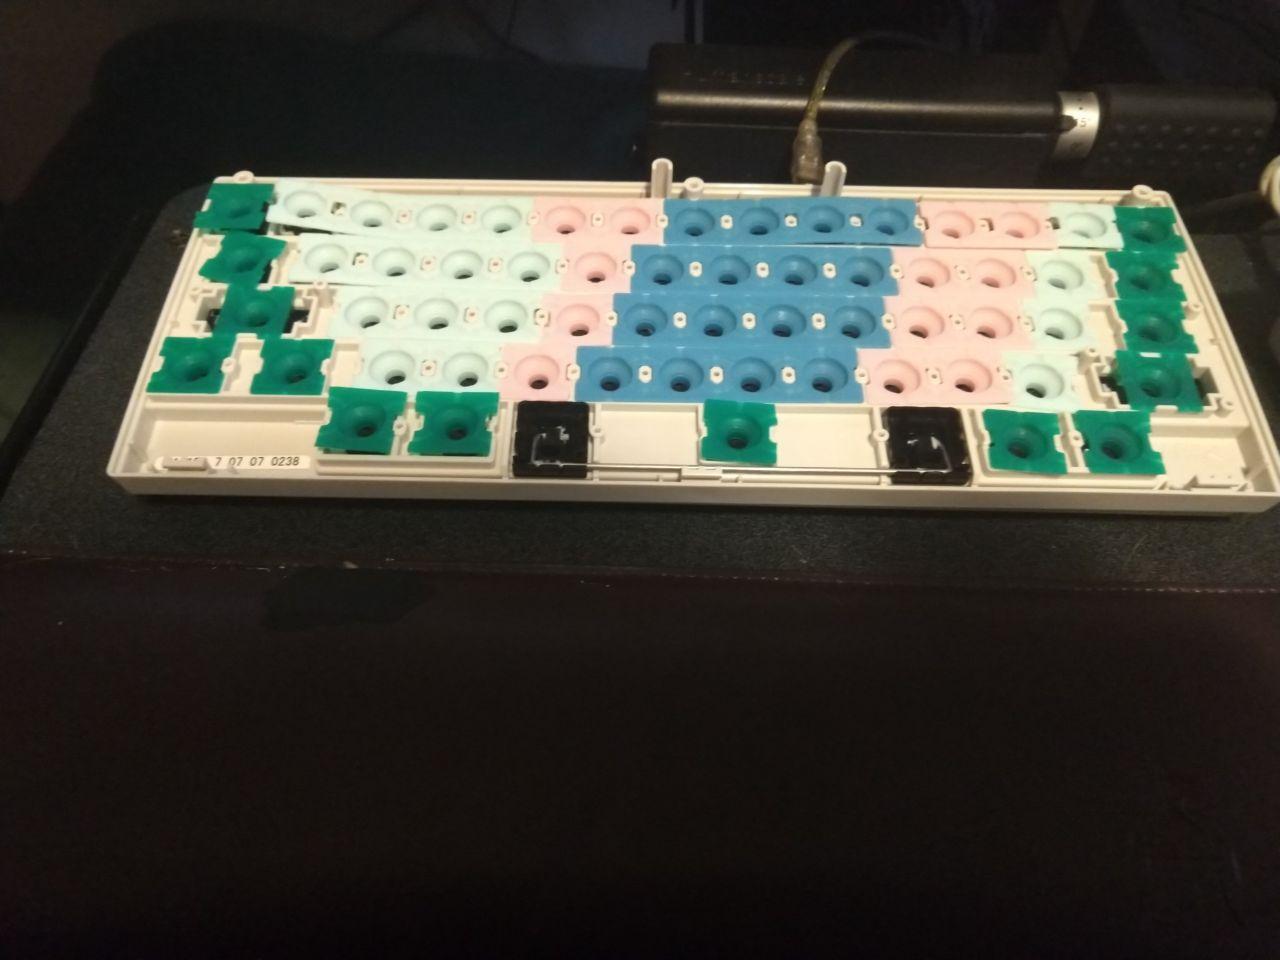 Inside of a HHKB Pro 2 with different colored domes installed.